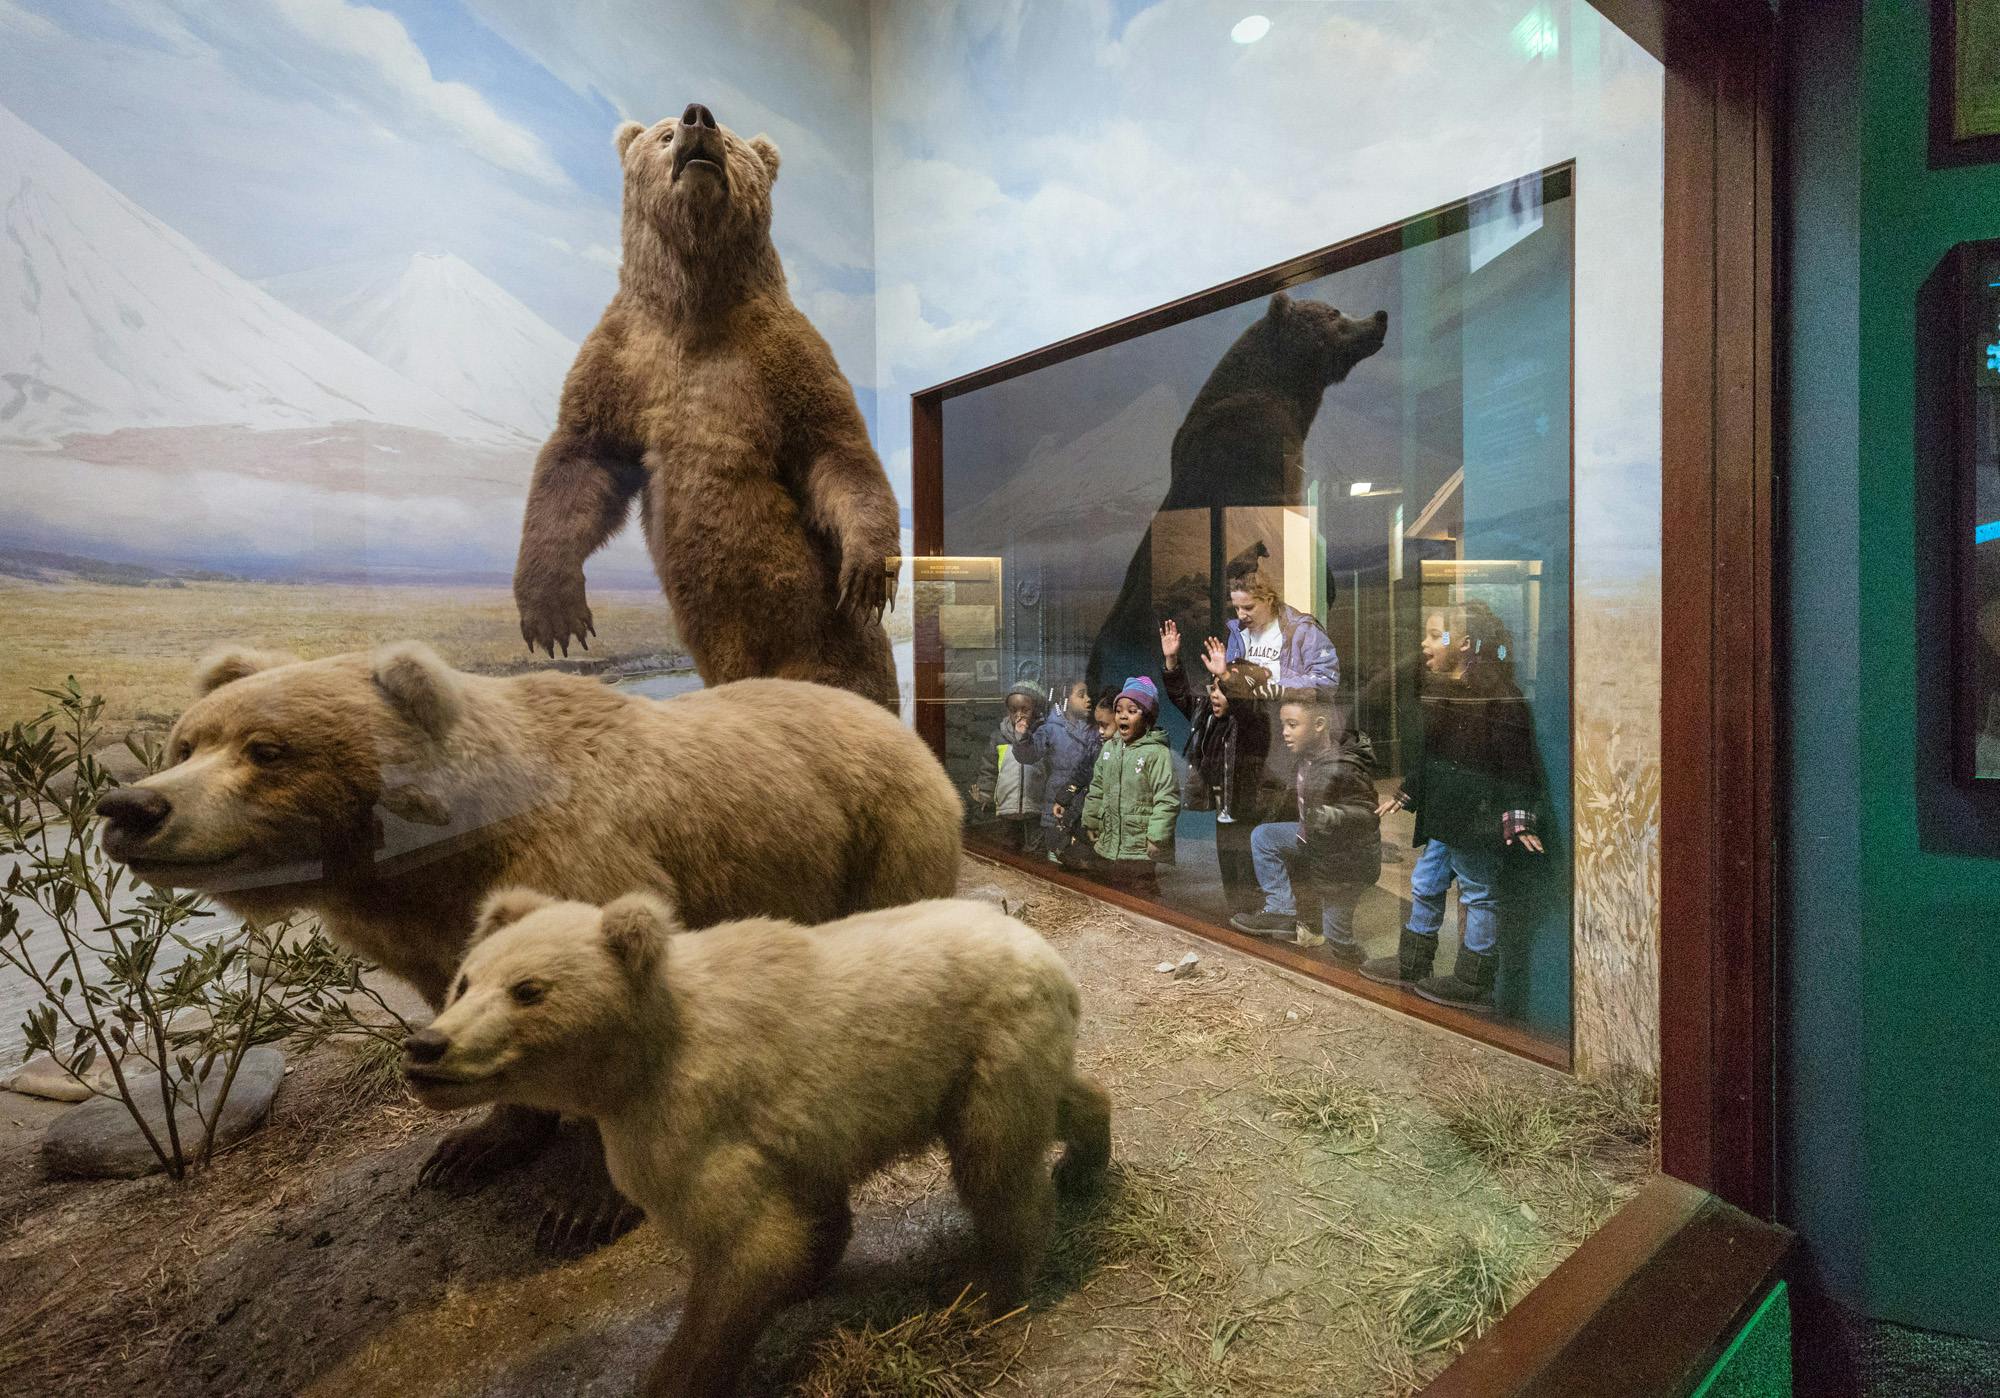 Students gather around a window to peer into a diorama featuring three bears in their natural habitat.